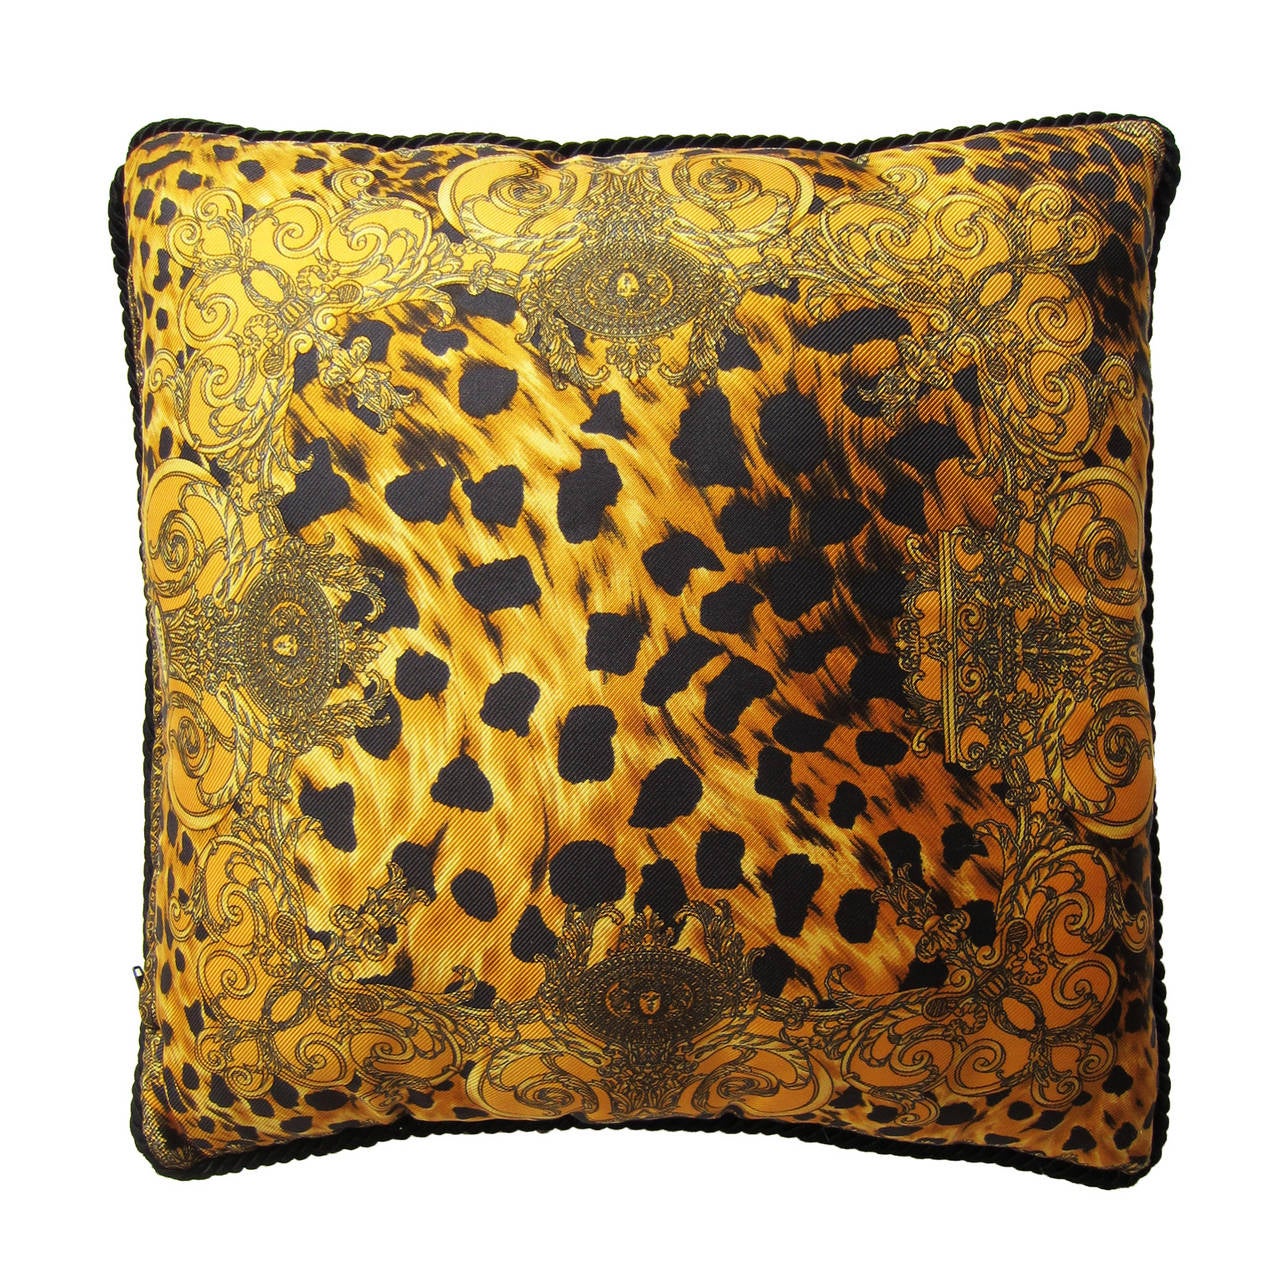 Atelier Versace silk pillow. 
Golden brown base leopard silk prints, with contrasted black rope edge. 
40 cm x 40 cm